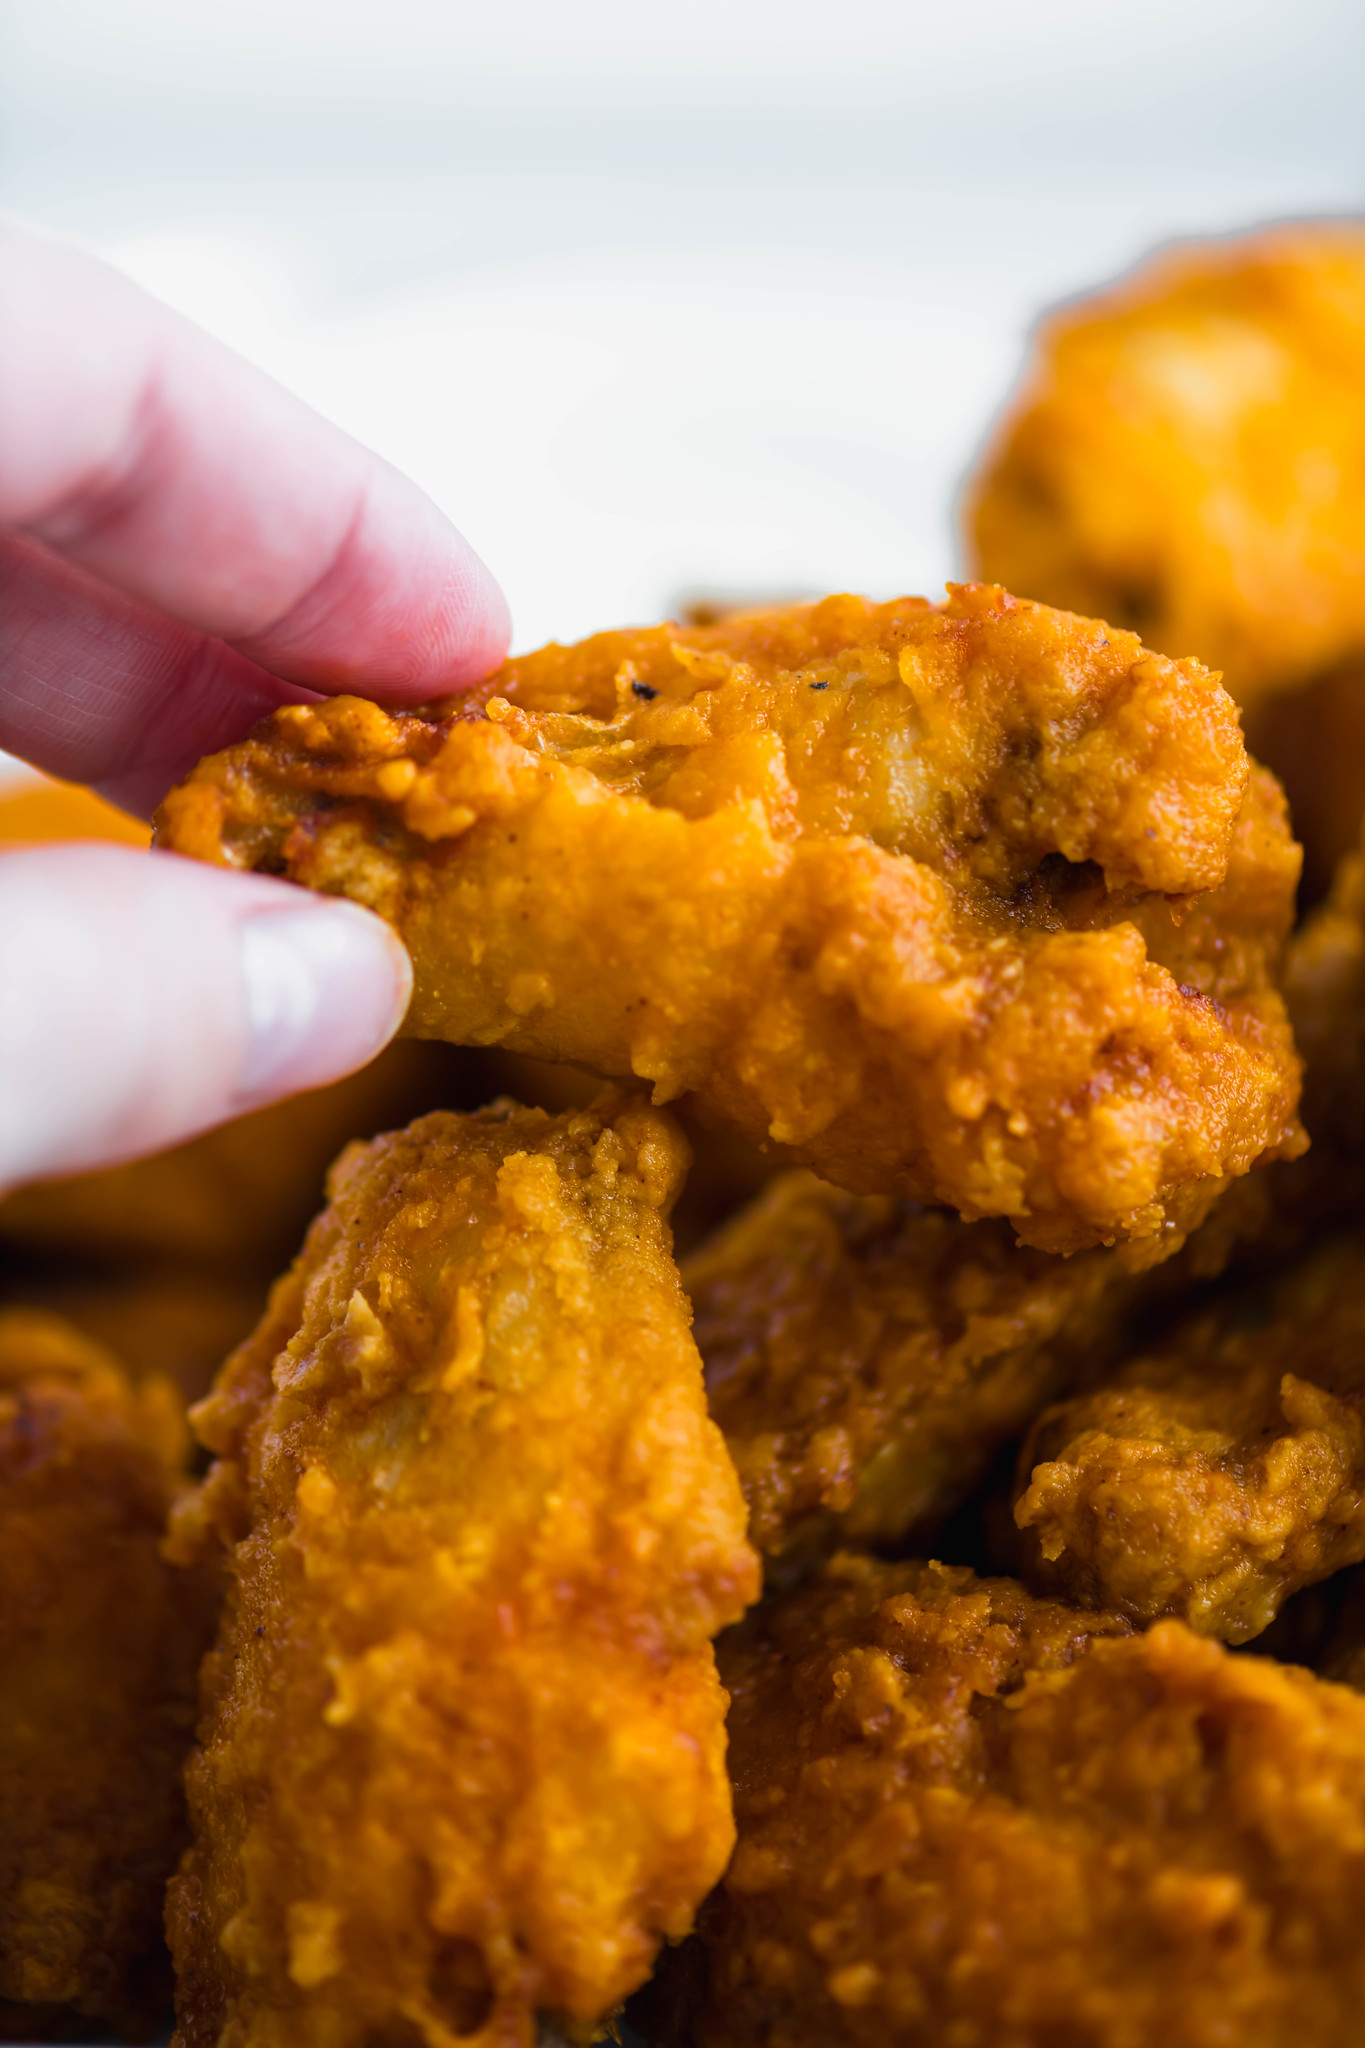 These Copycat Hooters Buffalo Wings are just what you need for the big game. Super crispy with the best buffalo sauce.